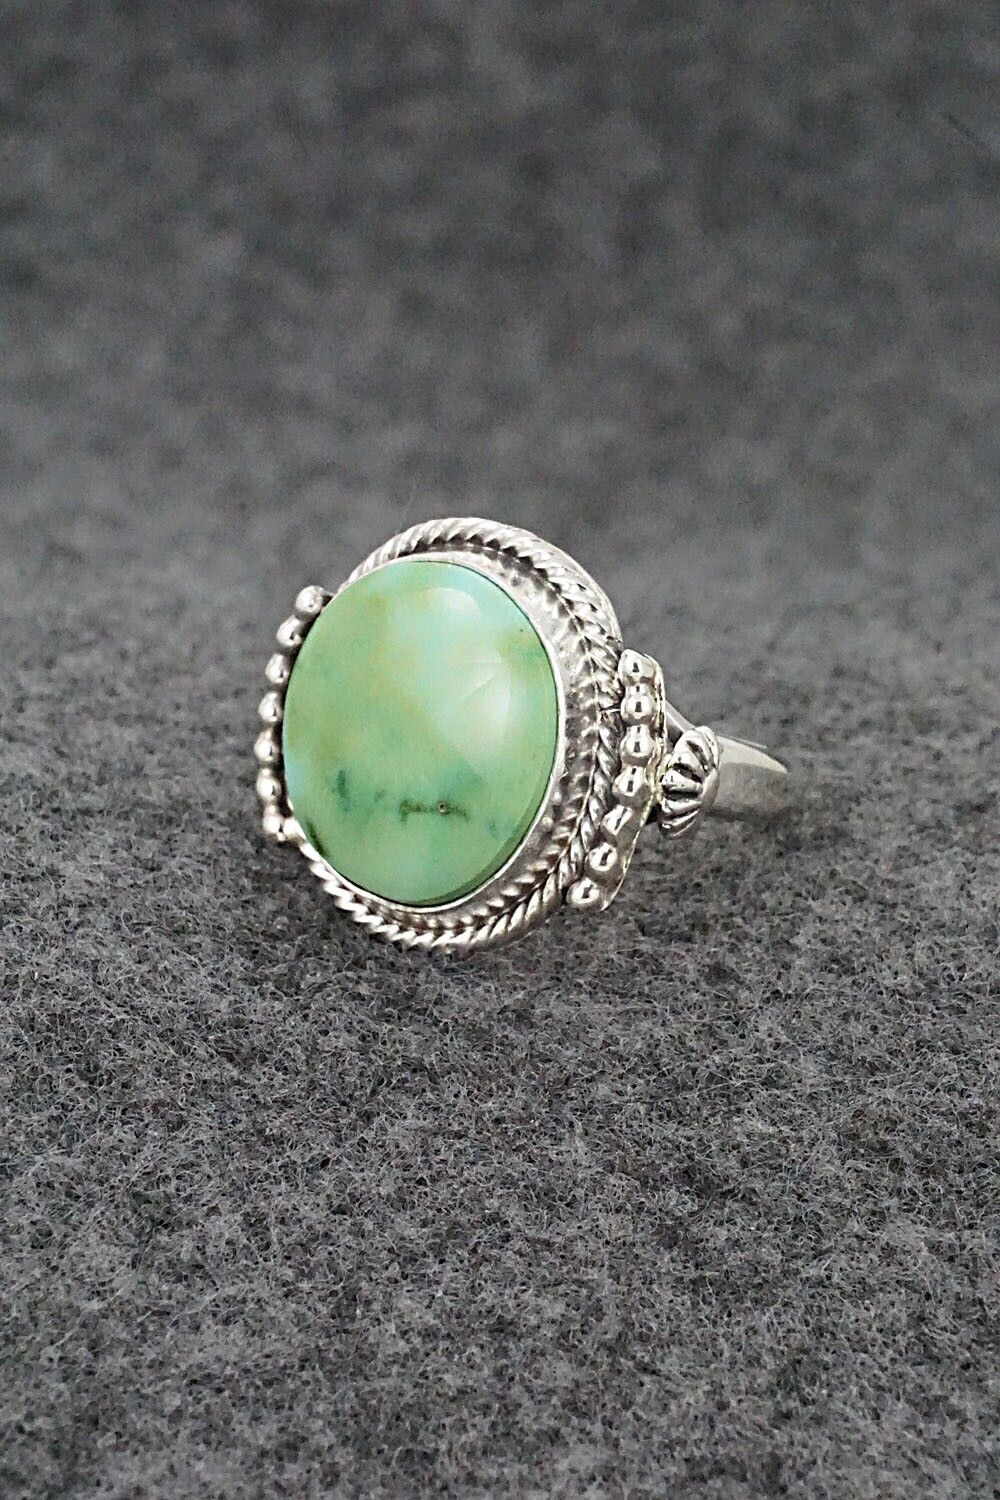 Turquoise & Sterling Silver Ring - Andrew Vandever - Size 7